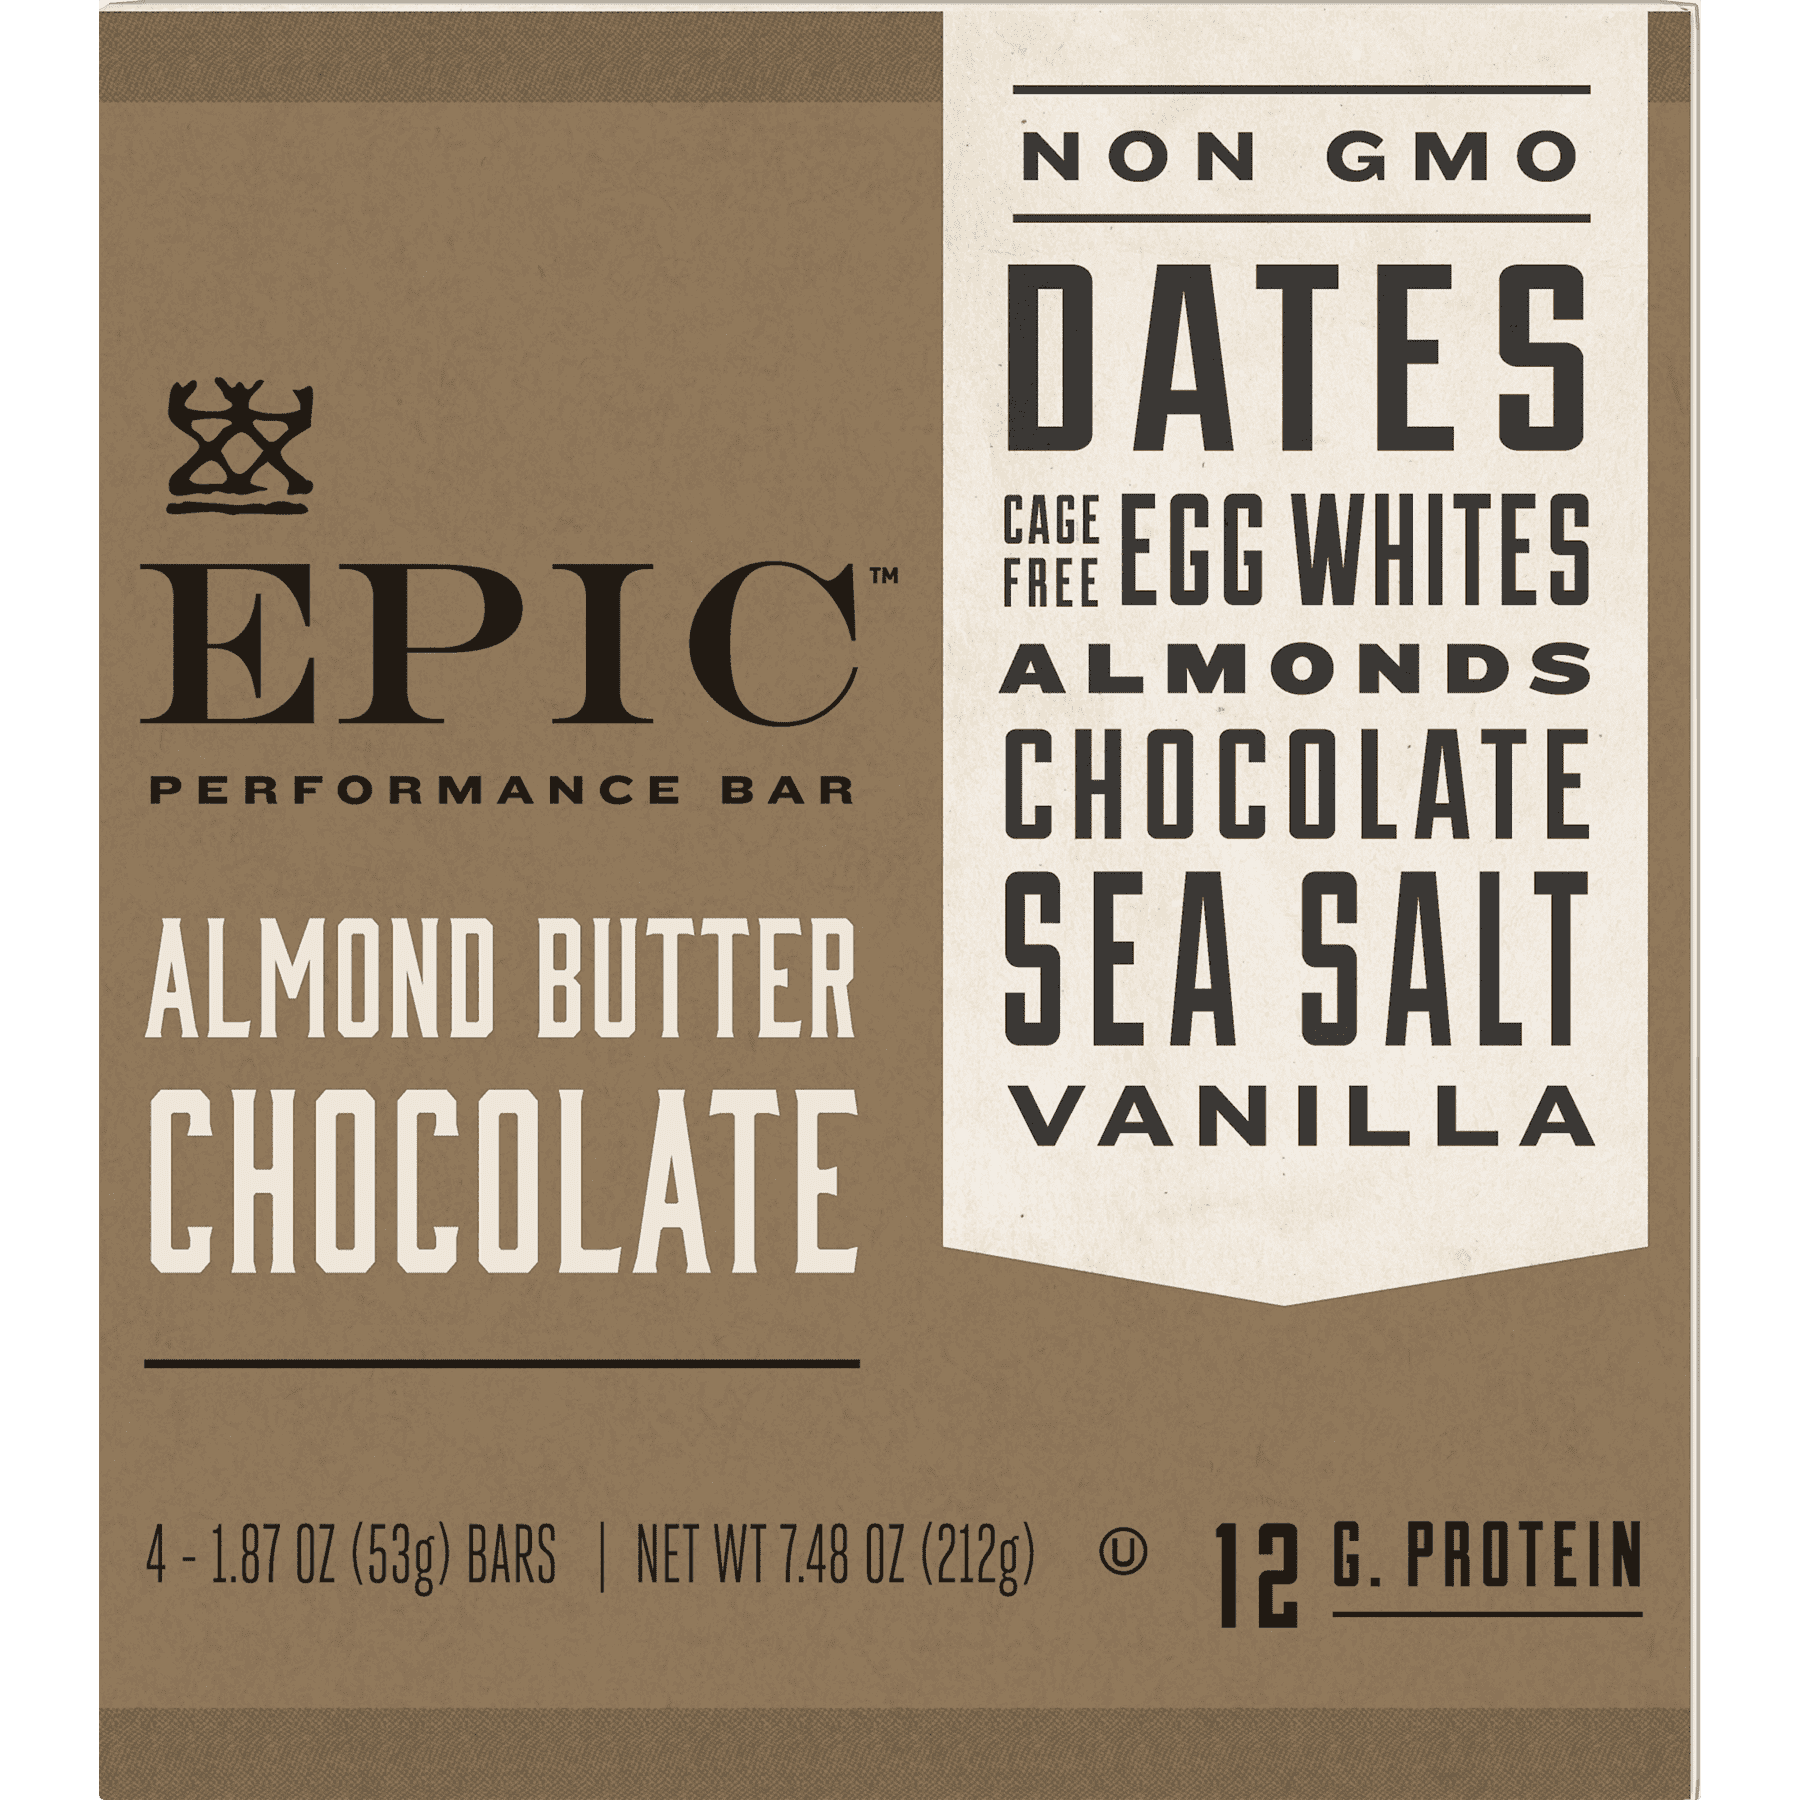 EPIC™ Almond Butter Chocolate Performance Bar, 1.87 oz - Fry's Food Stores